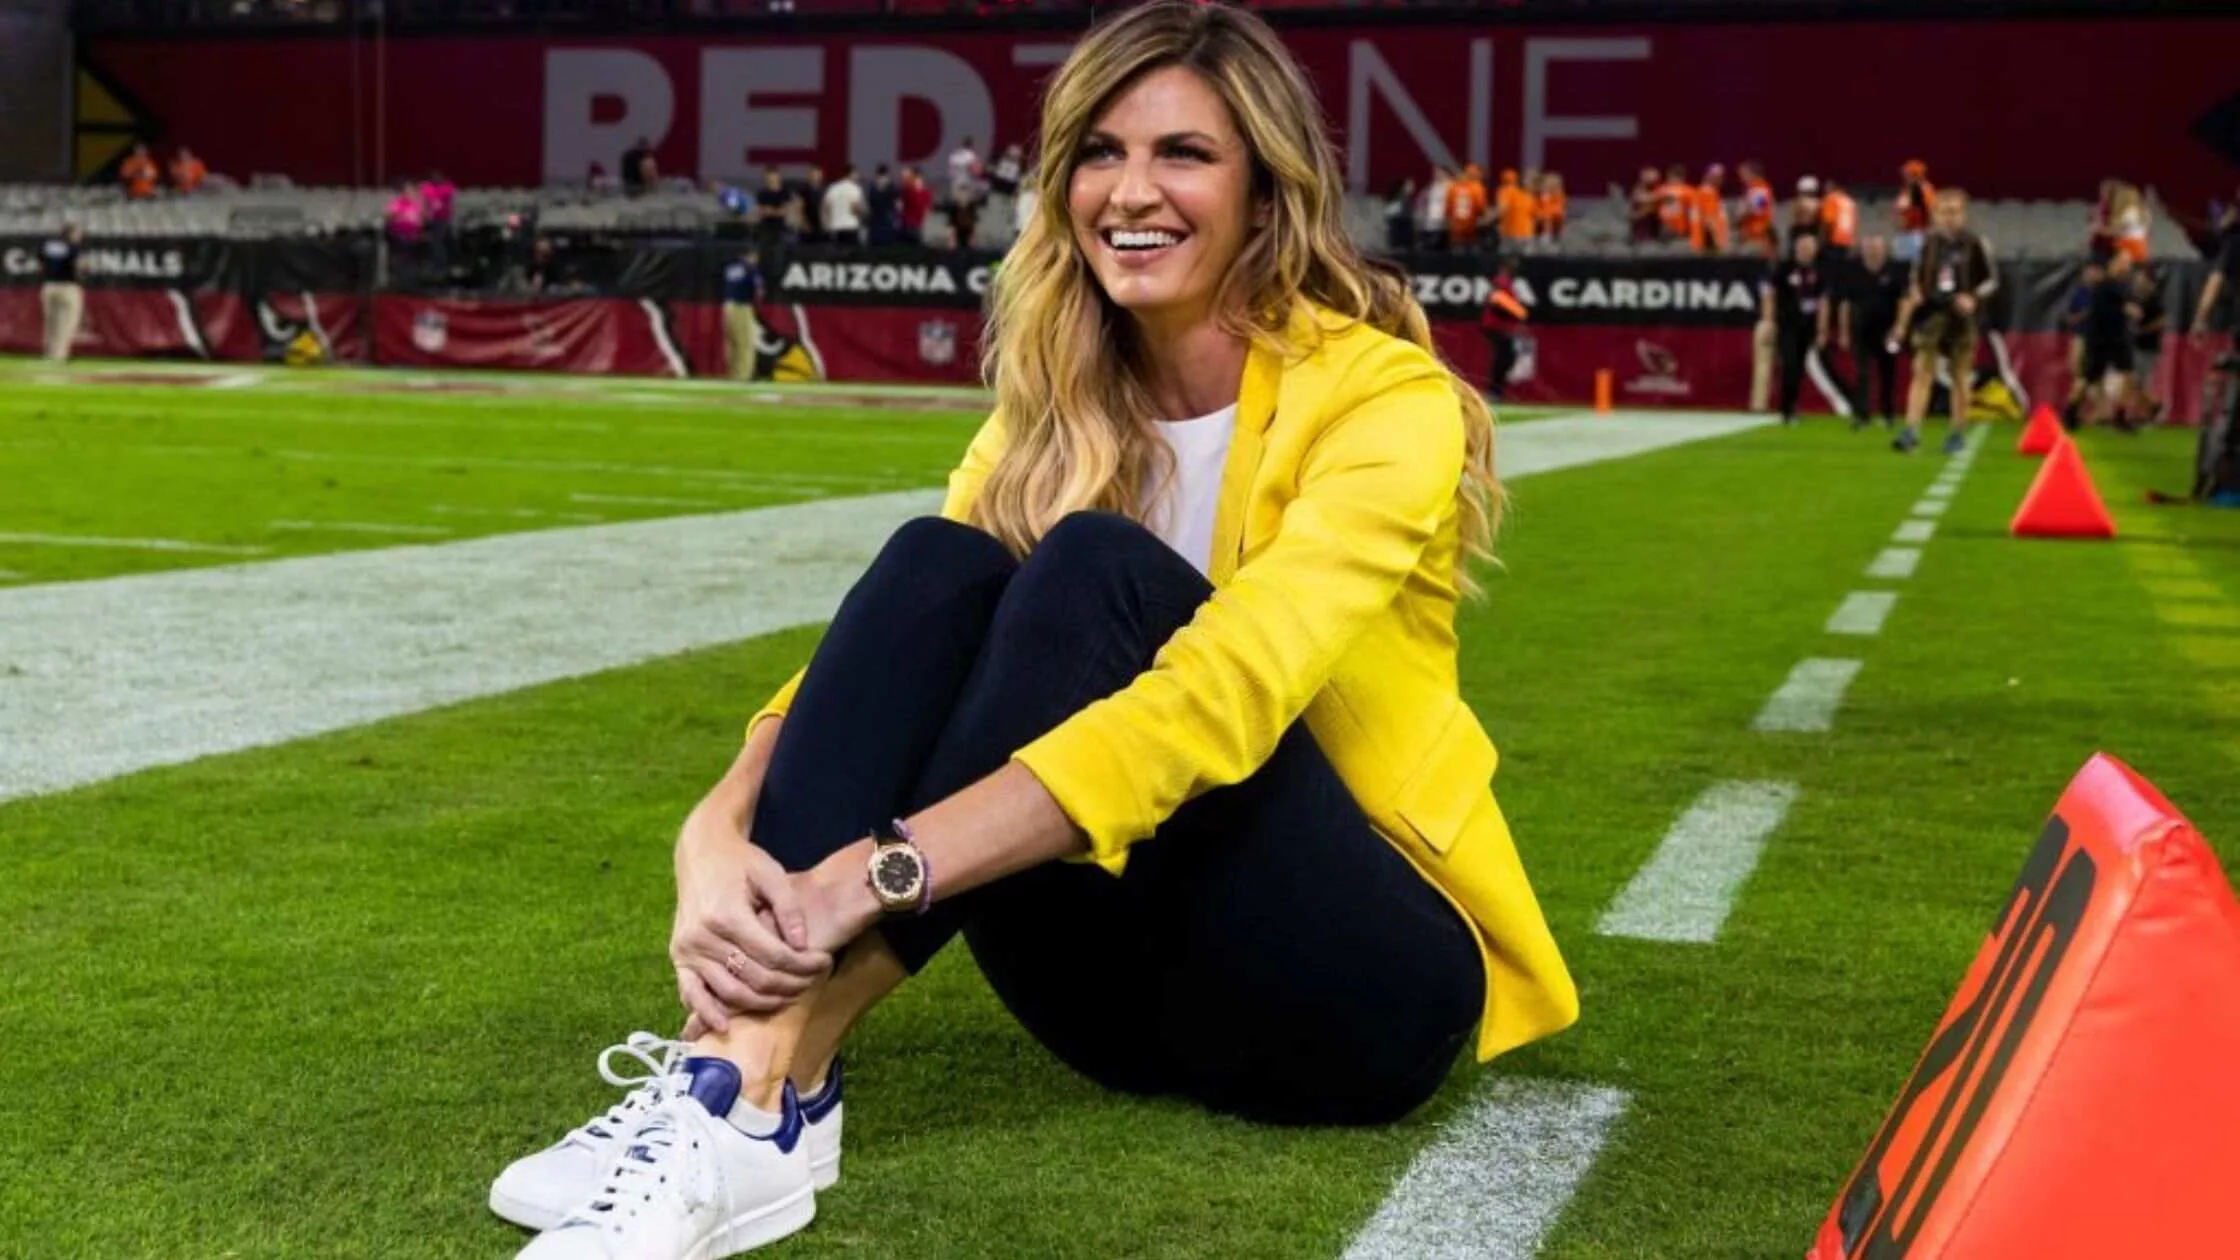 Erin Andrews as an Sports Caster